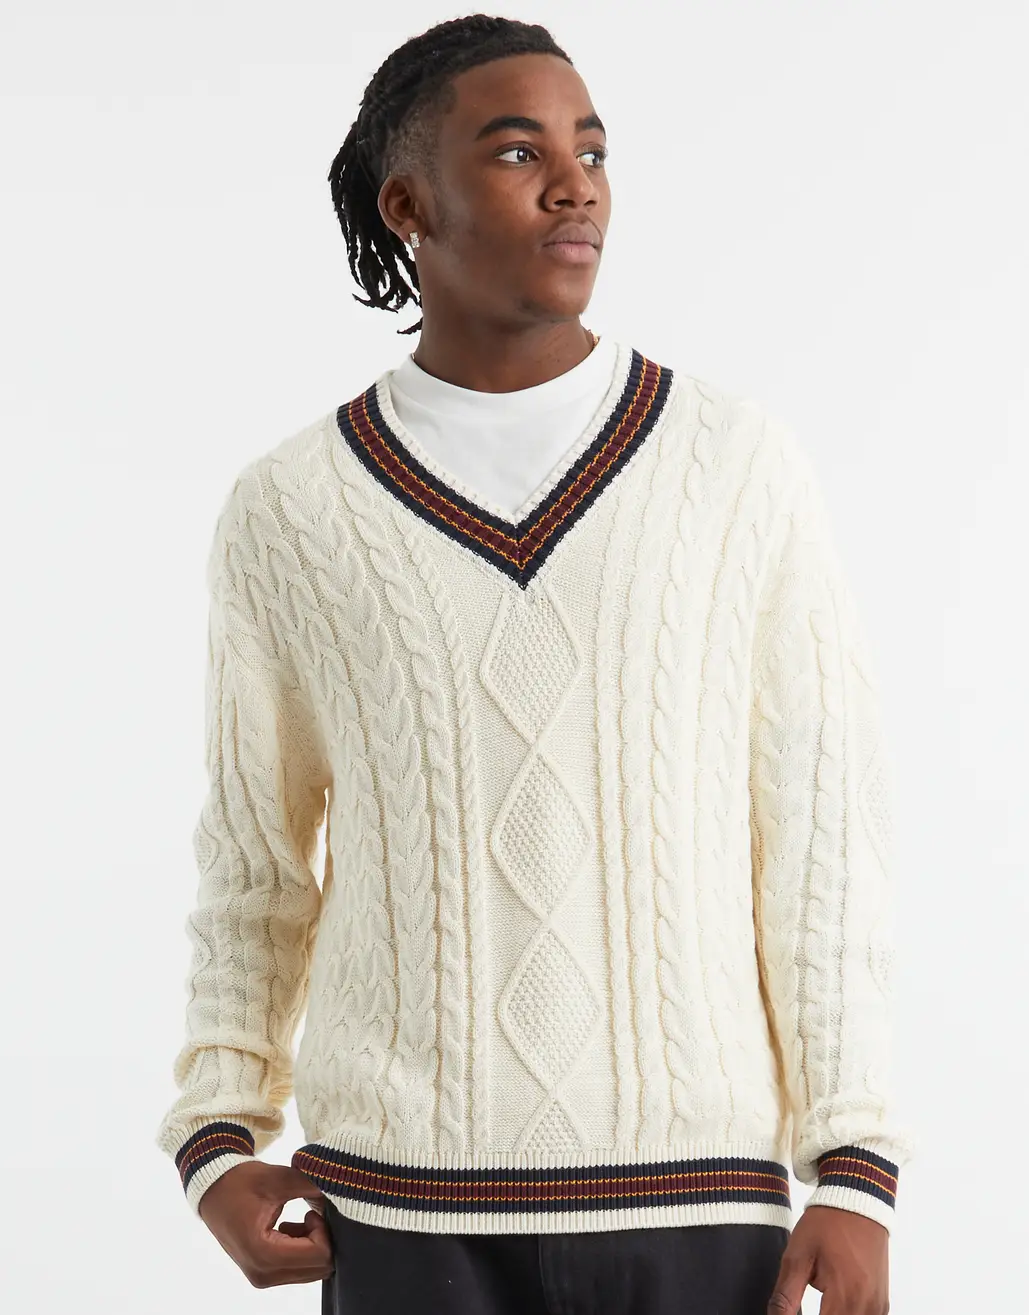 V-NECK STRIPE CABLE KNITTED JUMPER IN CREAM